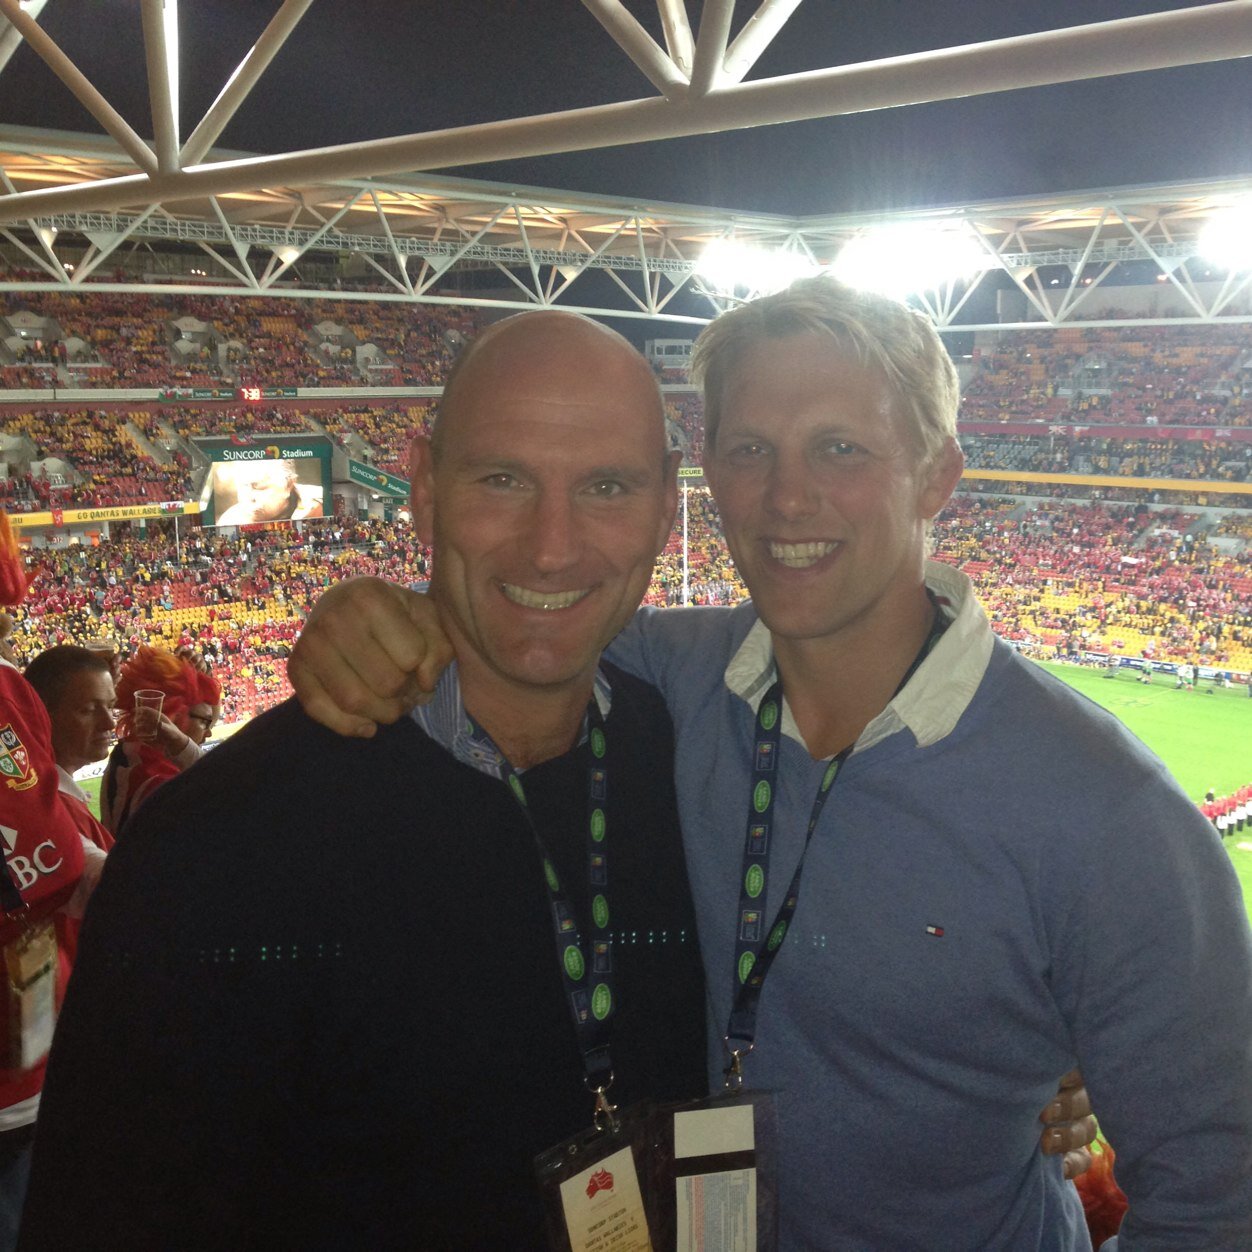 It's @lewismoody7 bringing you the best video and twitter content direct from the @lionsofficial tour of Australia 2013.